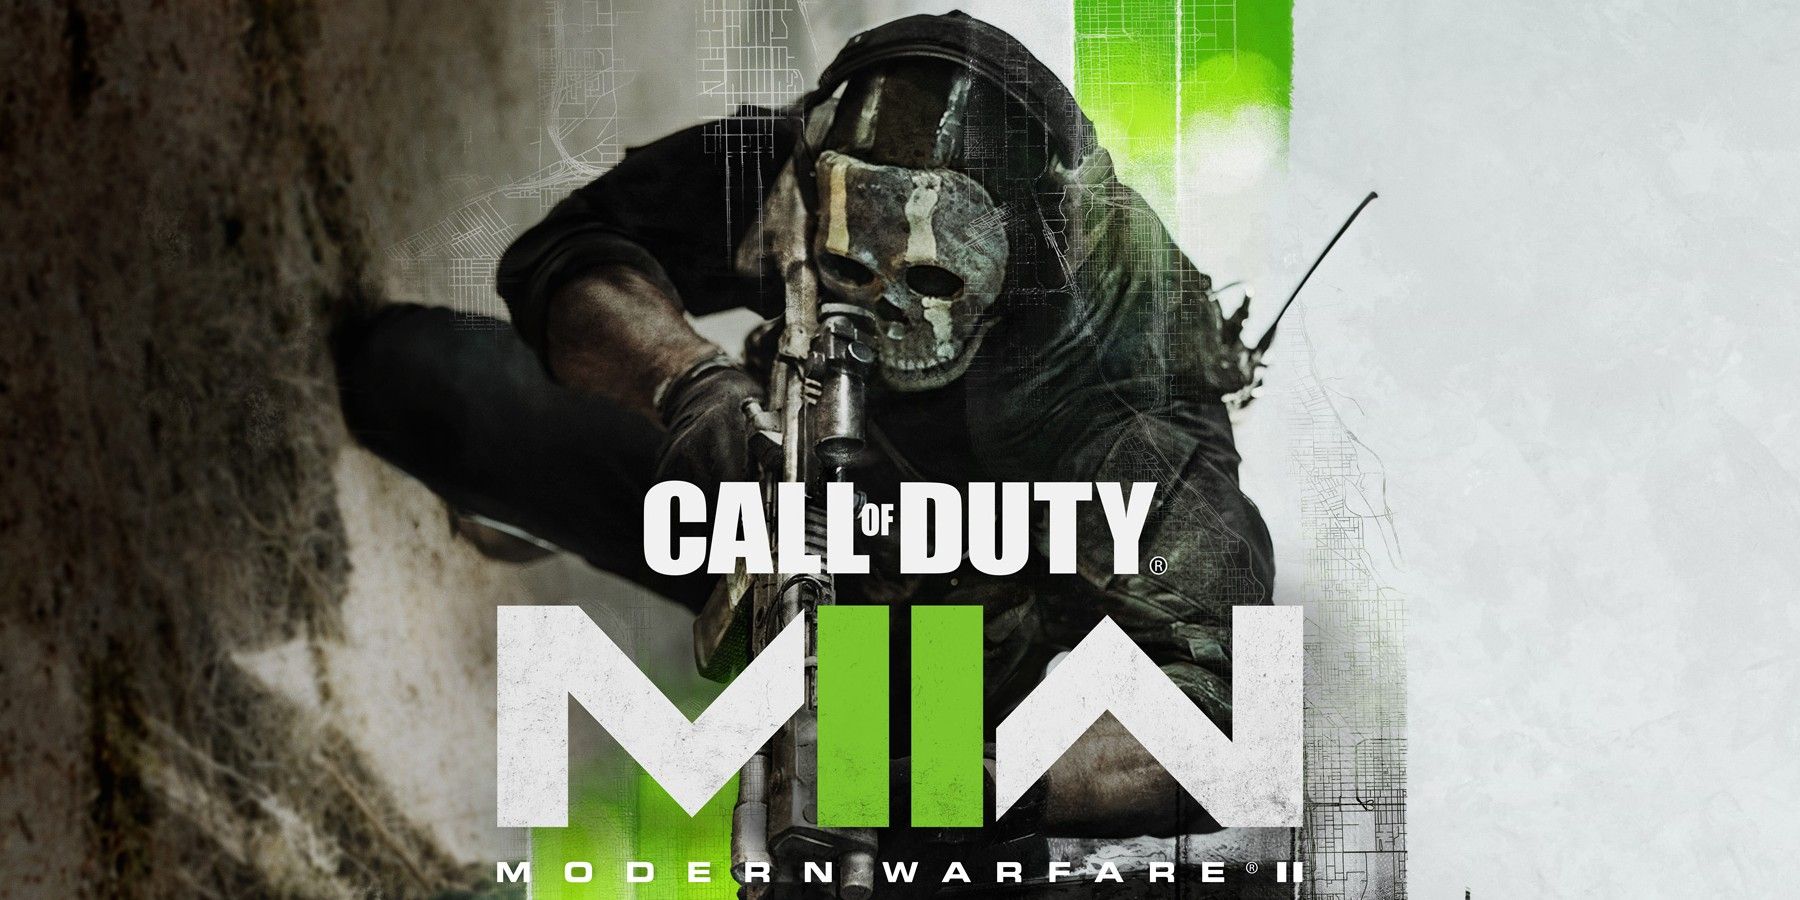 Steam must be running to play this game call of duty modern warfare фото 52